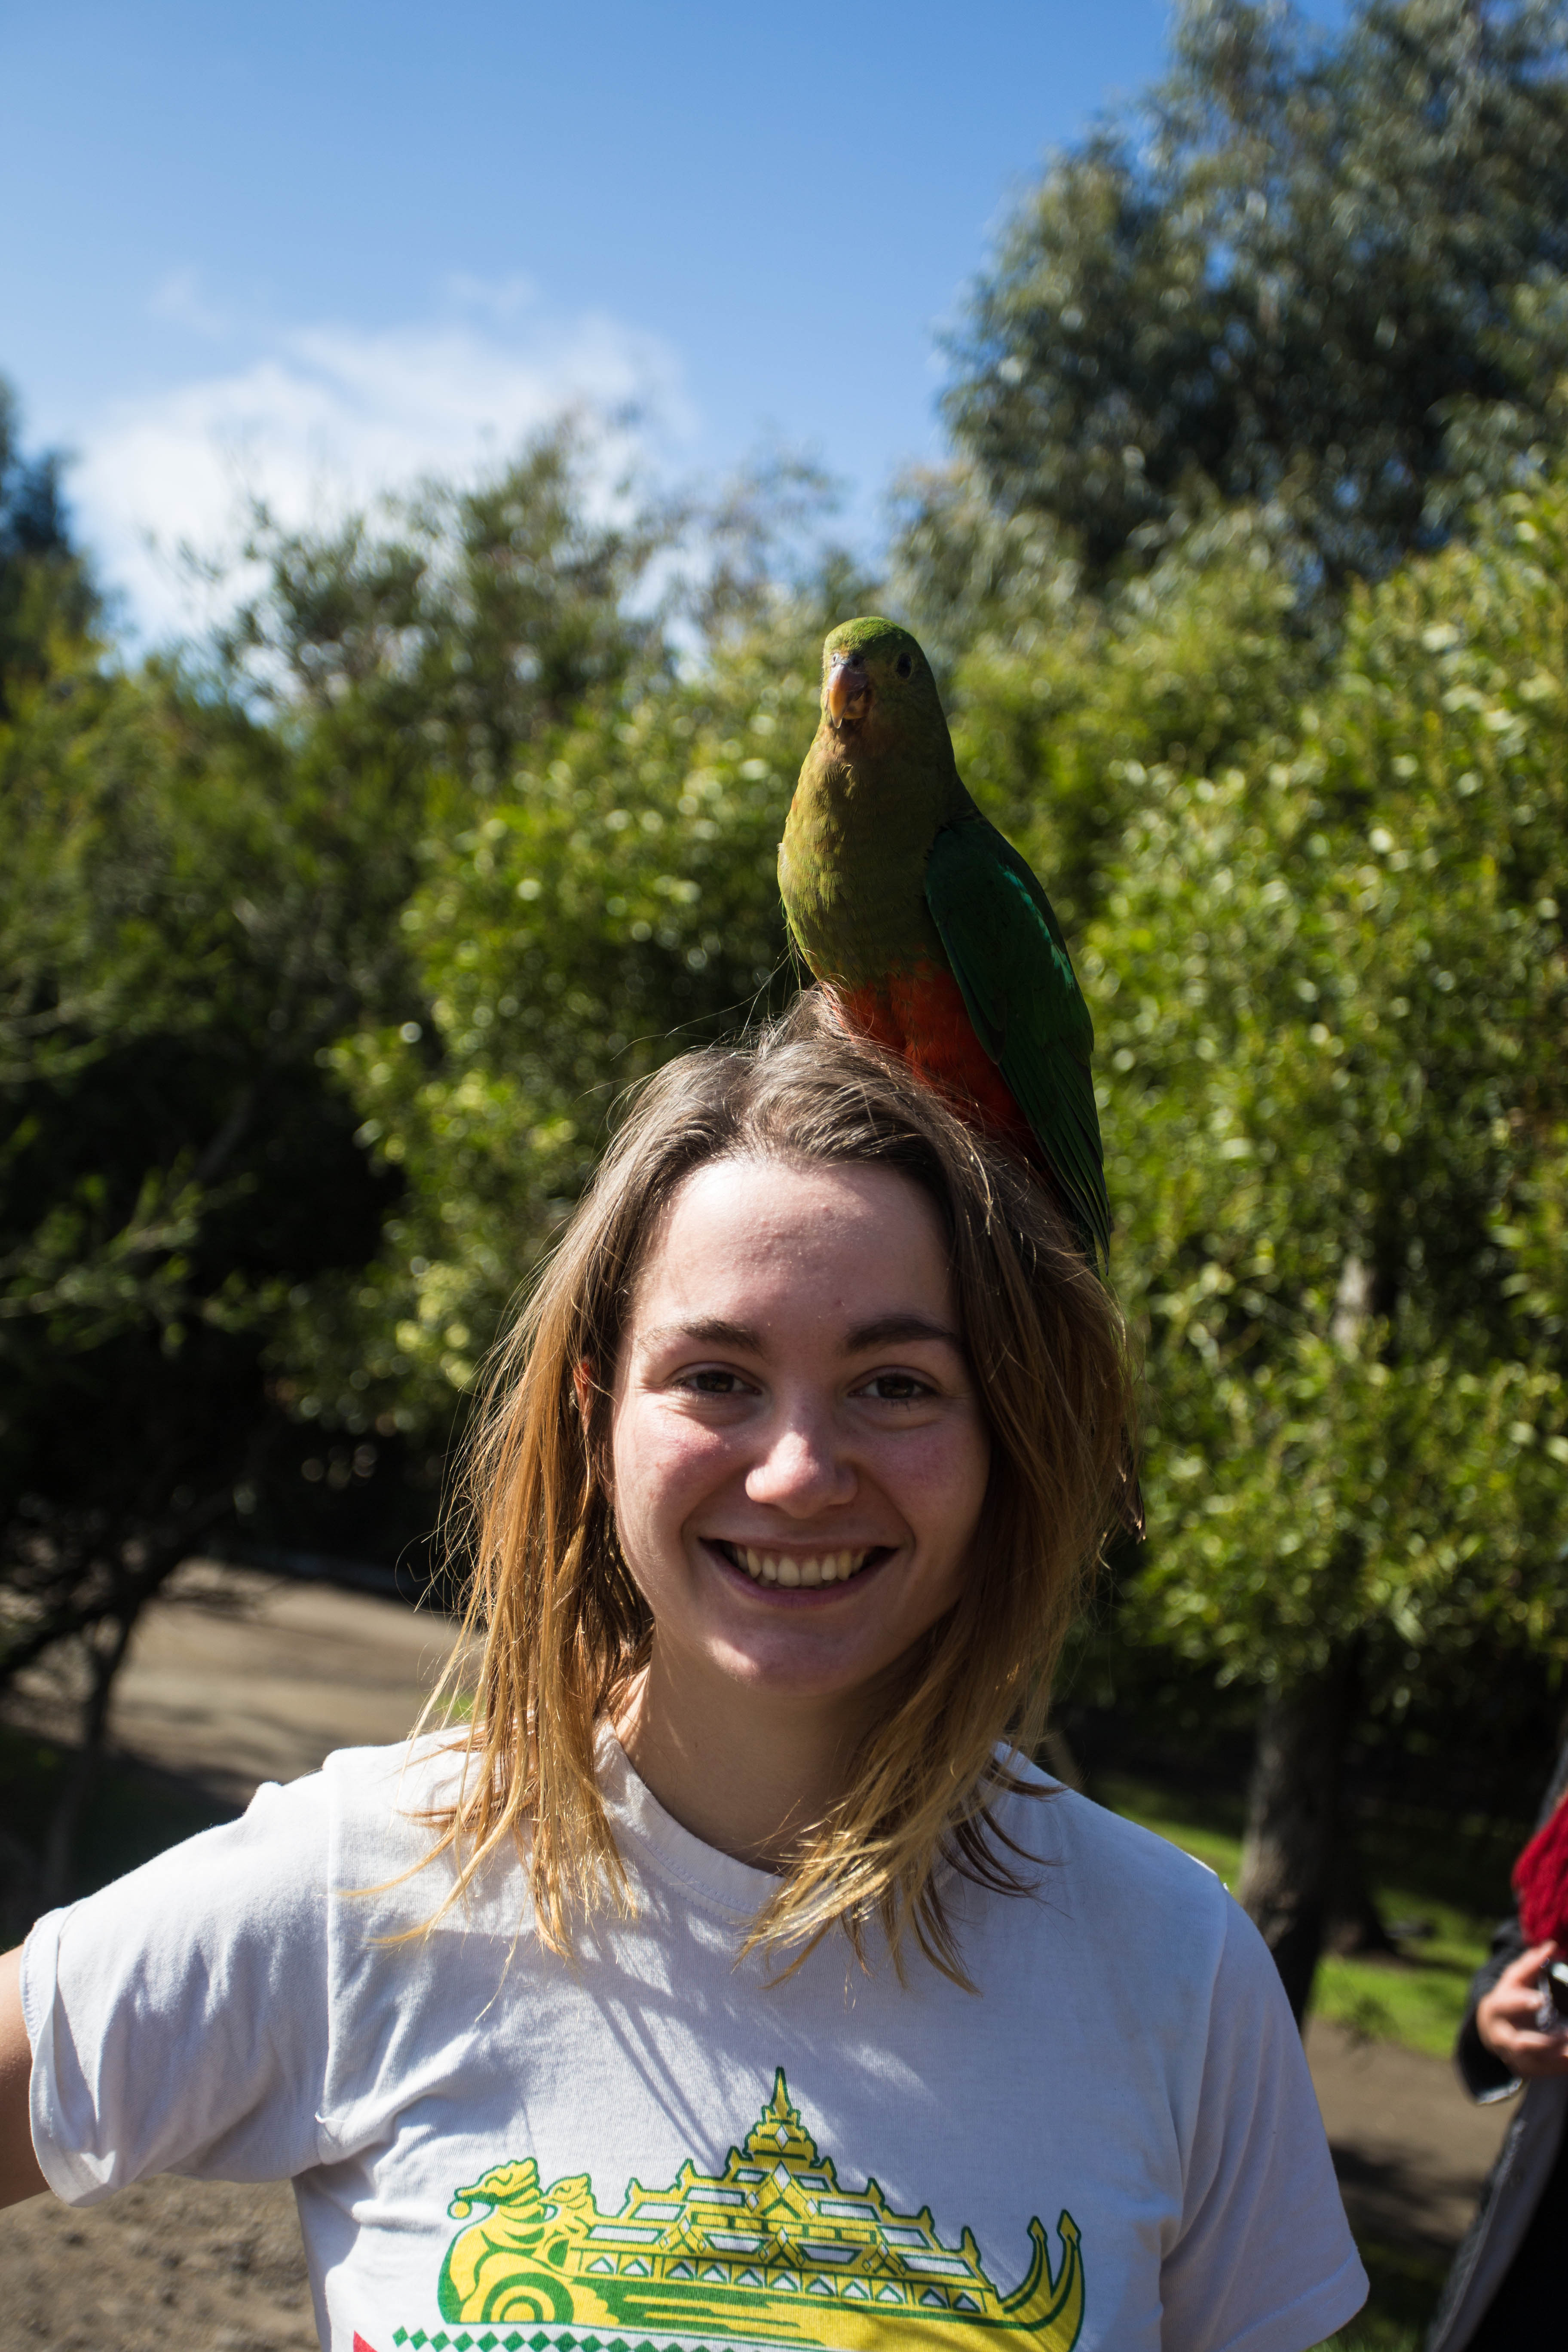 Elana, who spent the majority of our time at this carpark with a parrot atop her head